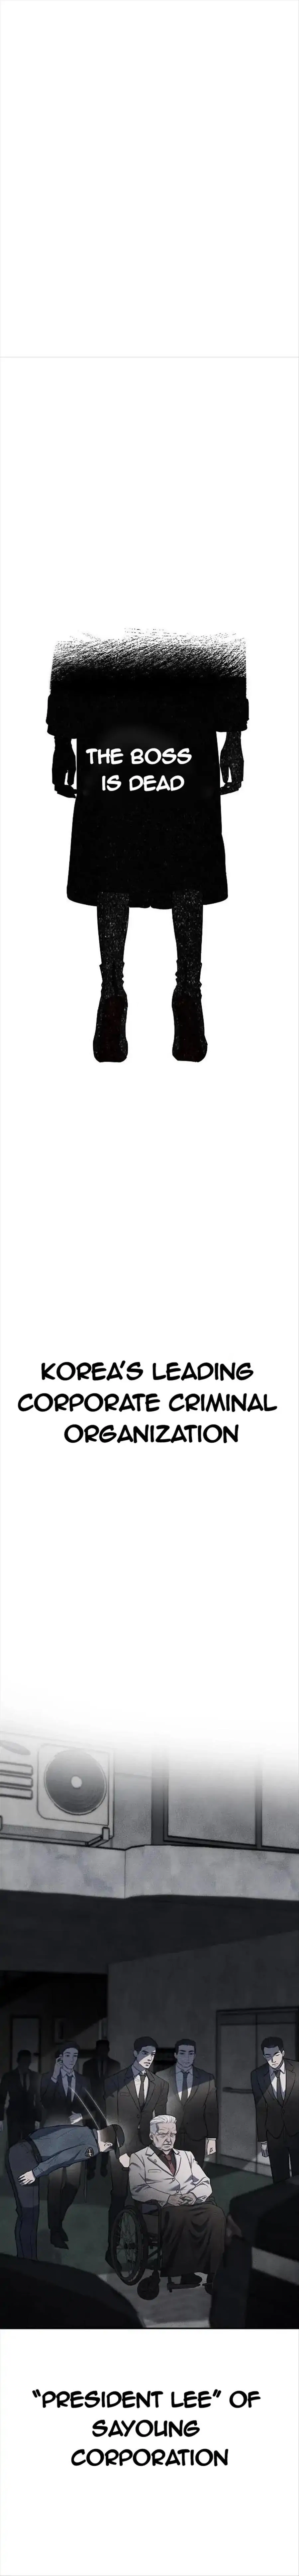 Undercover! Chaebol High School - Page 2